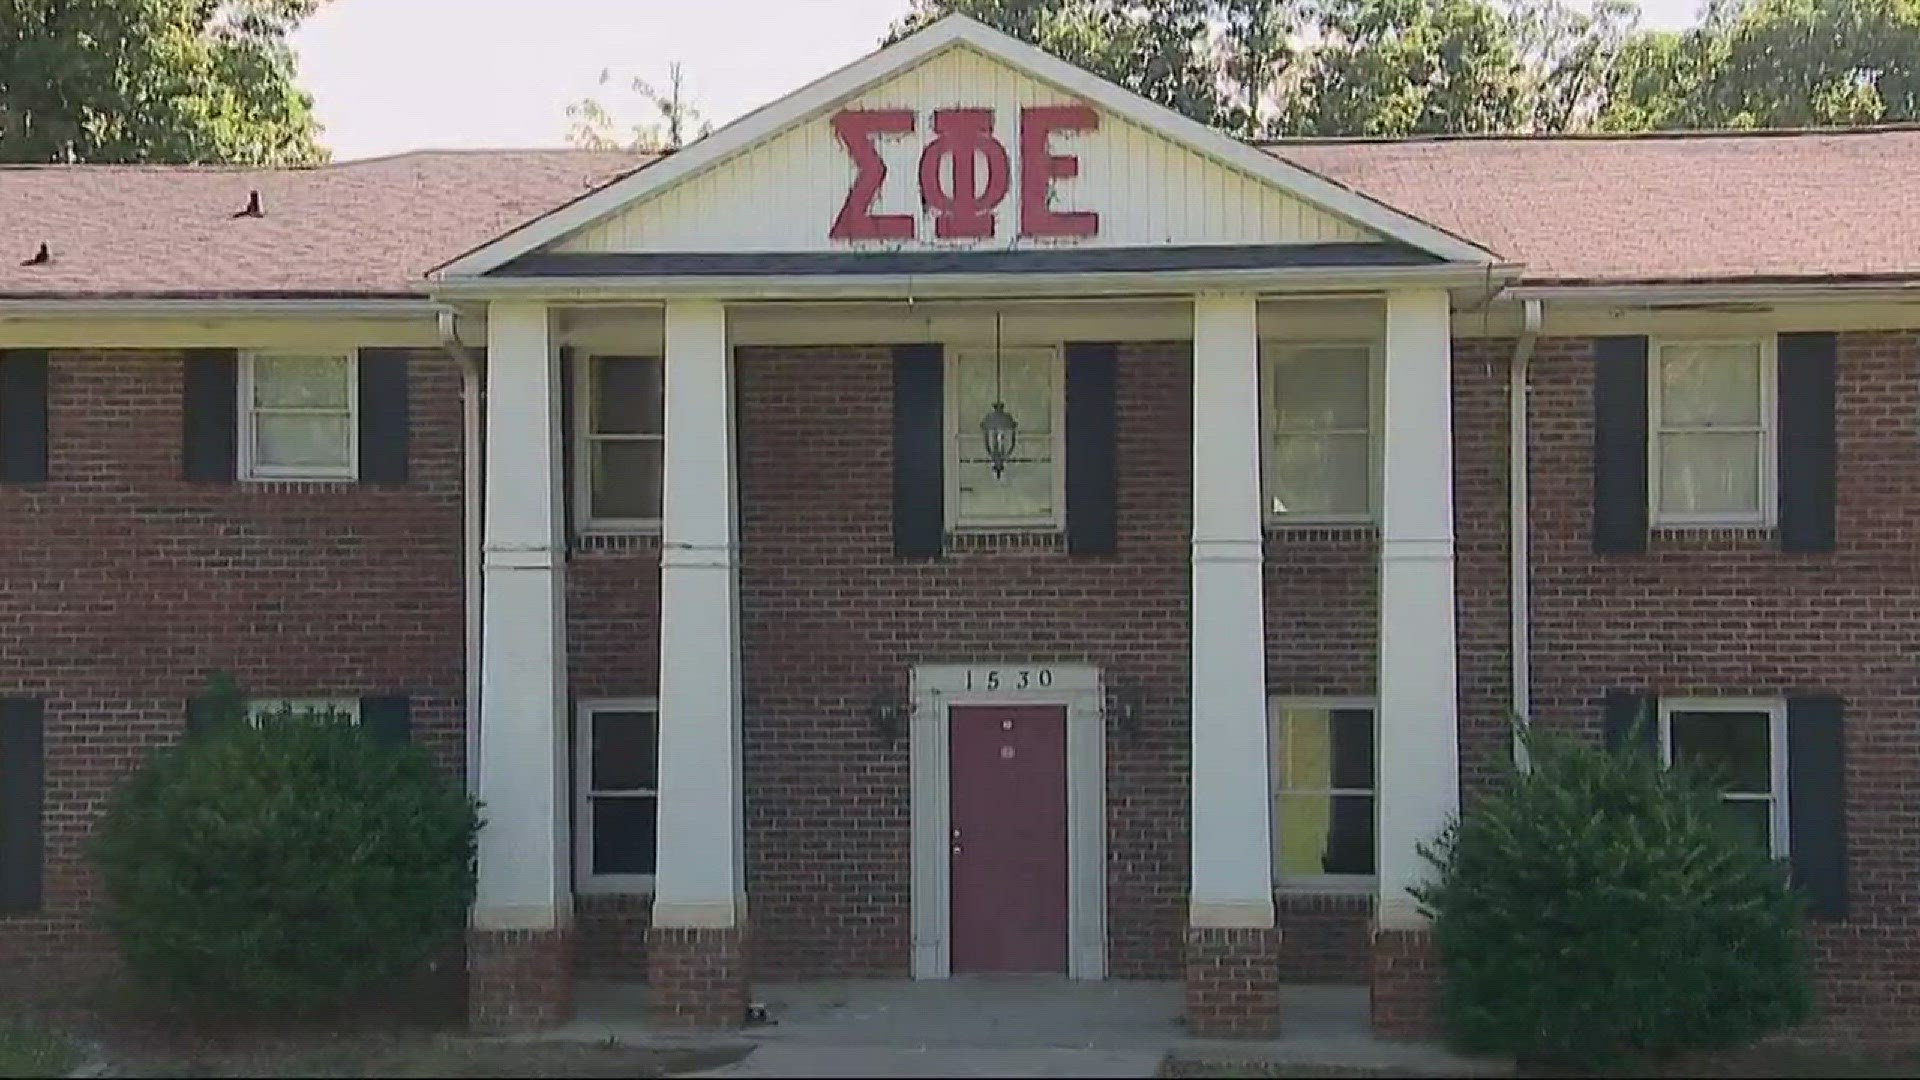 NBC Charlotte's Mark Boyle spoke exclusively with one of the fraternity brothers.